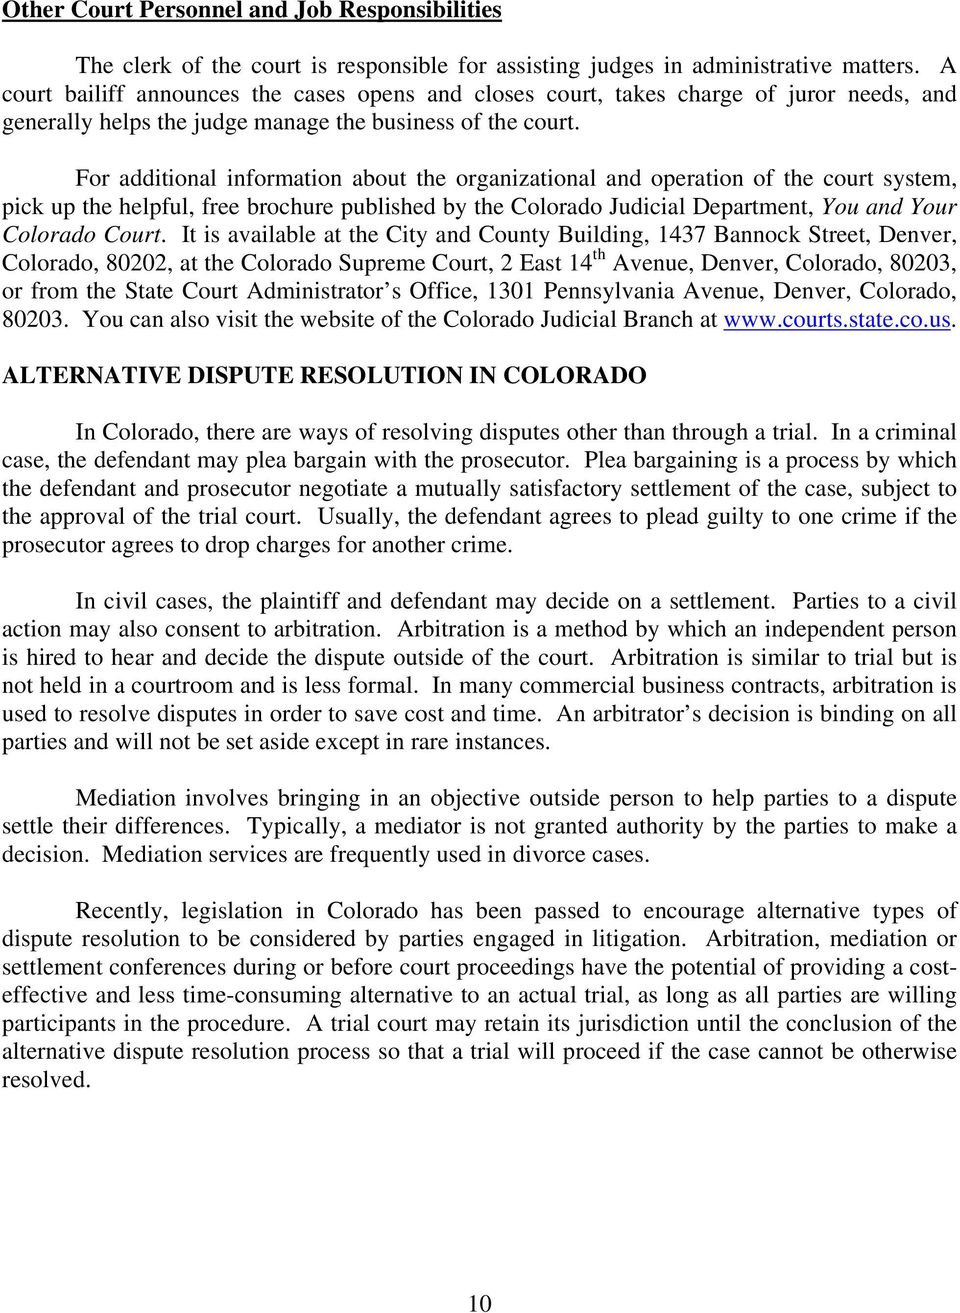 For additional information about the organizational and operation of the court system, pick up the helpful, free brochure published by the Colorado Judicial Department, You and Your Colorado Court.